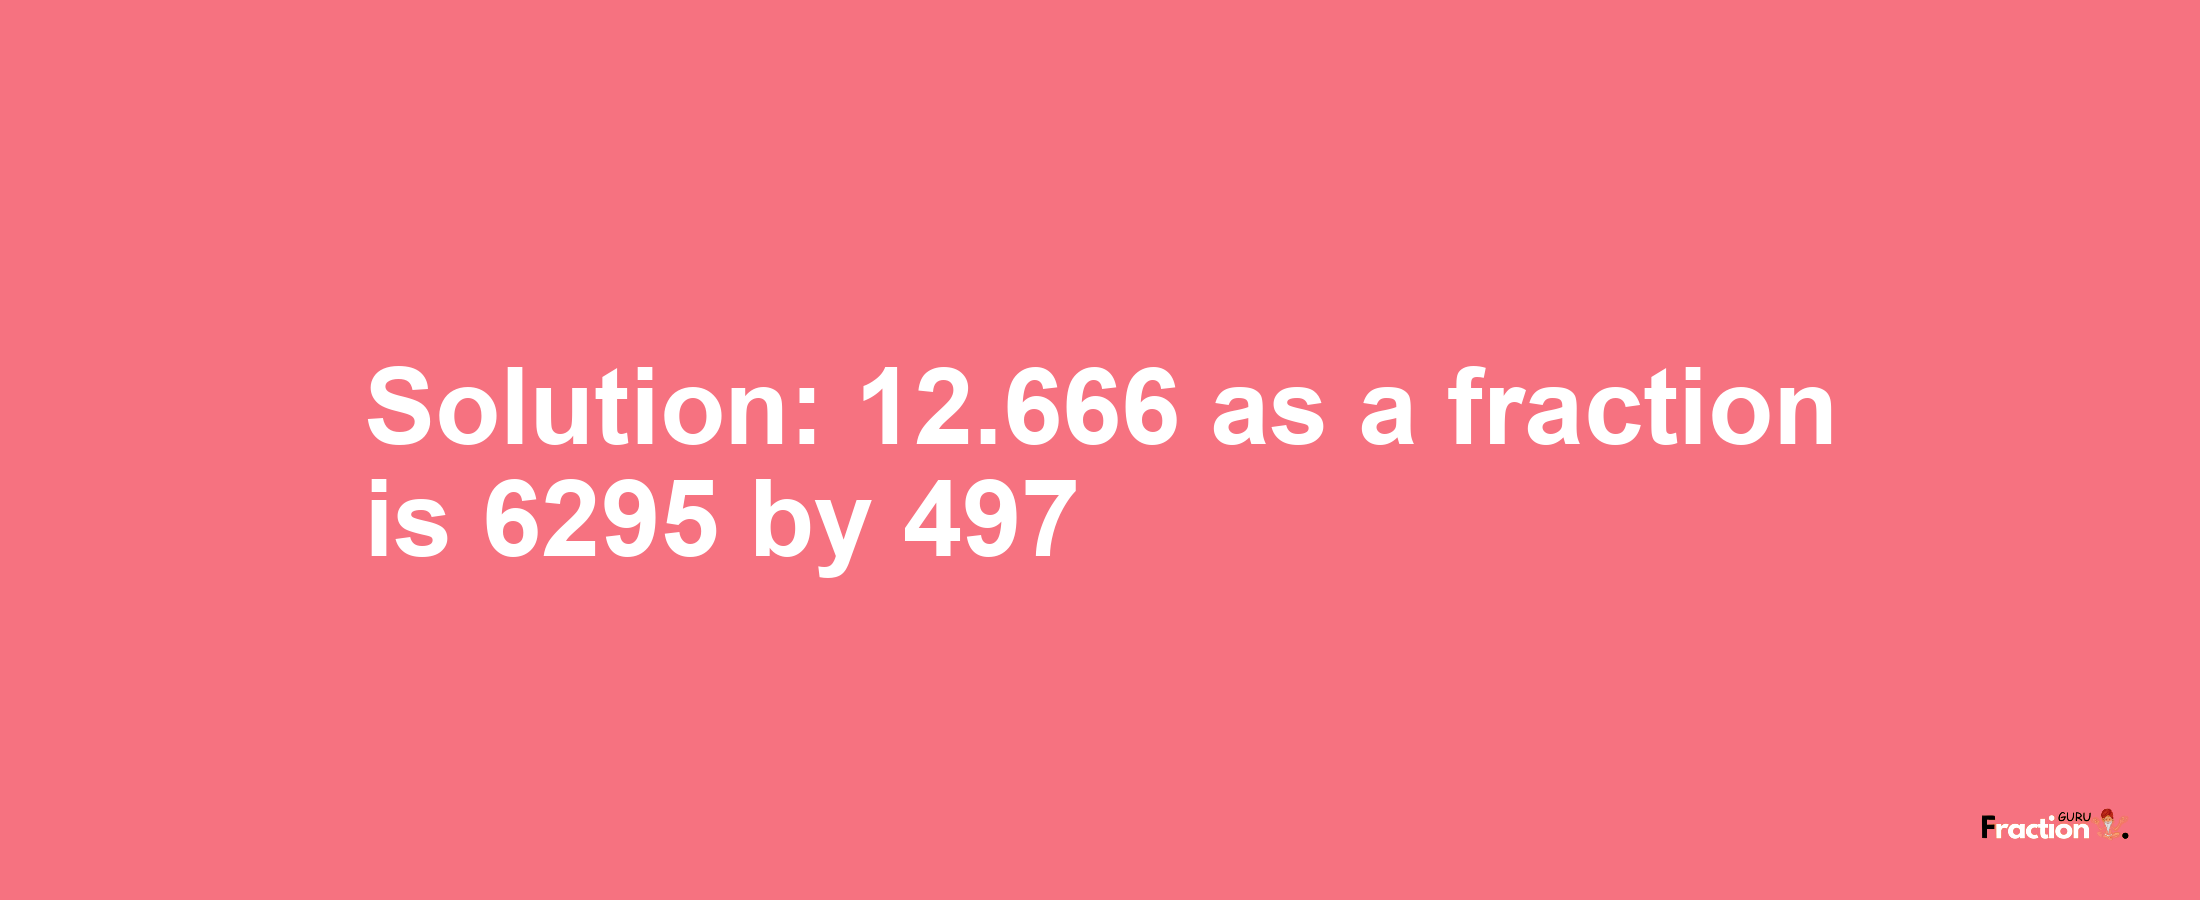 Solution:12.666 as a fraction is 6295/497